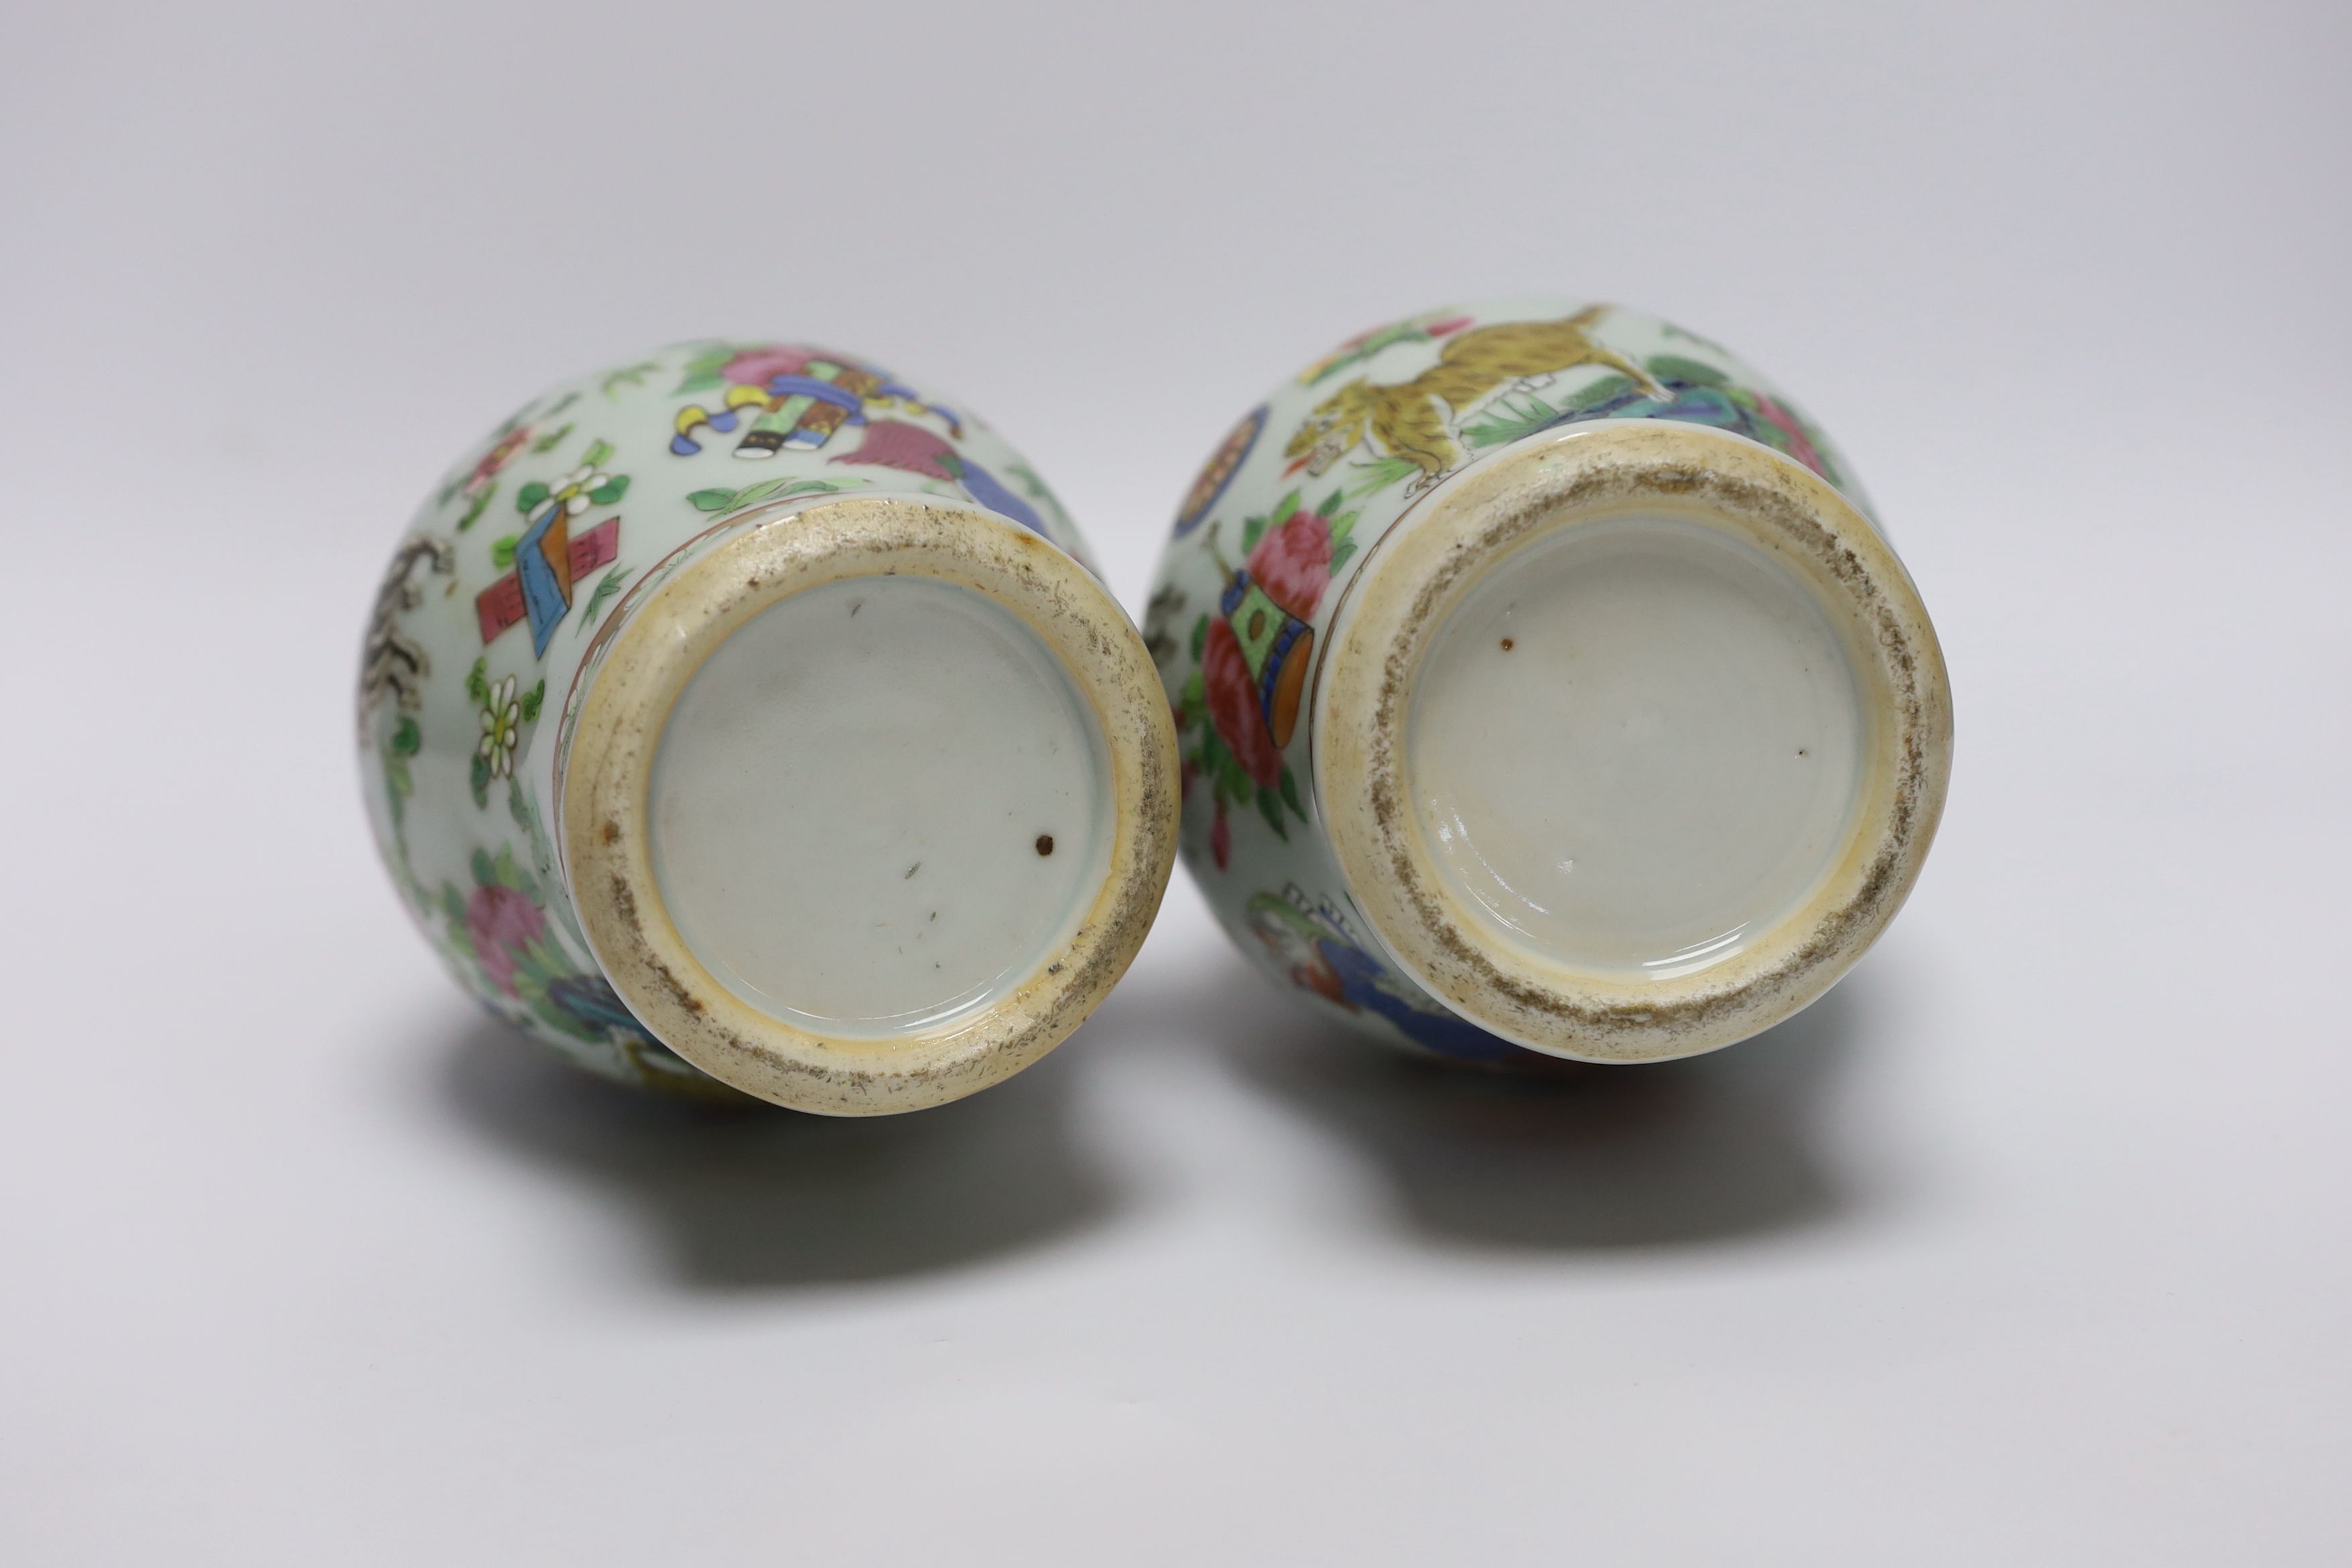 A pair of 19th century Chinese famille rose ‘mythical beasts’ vases, 24cm